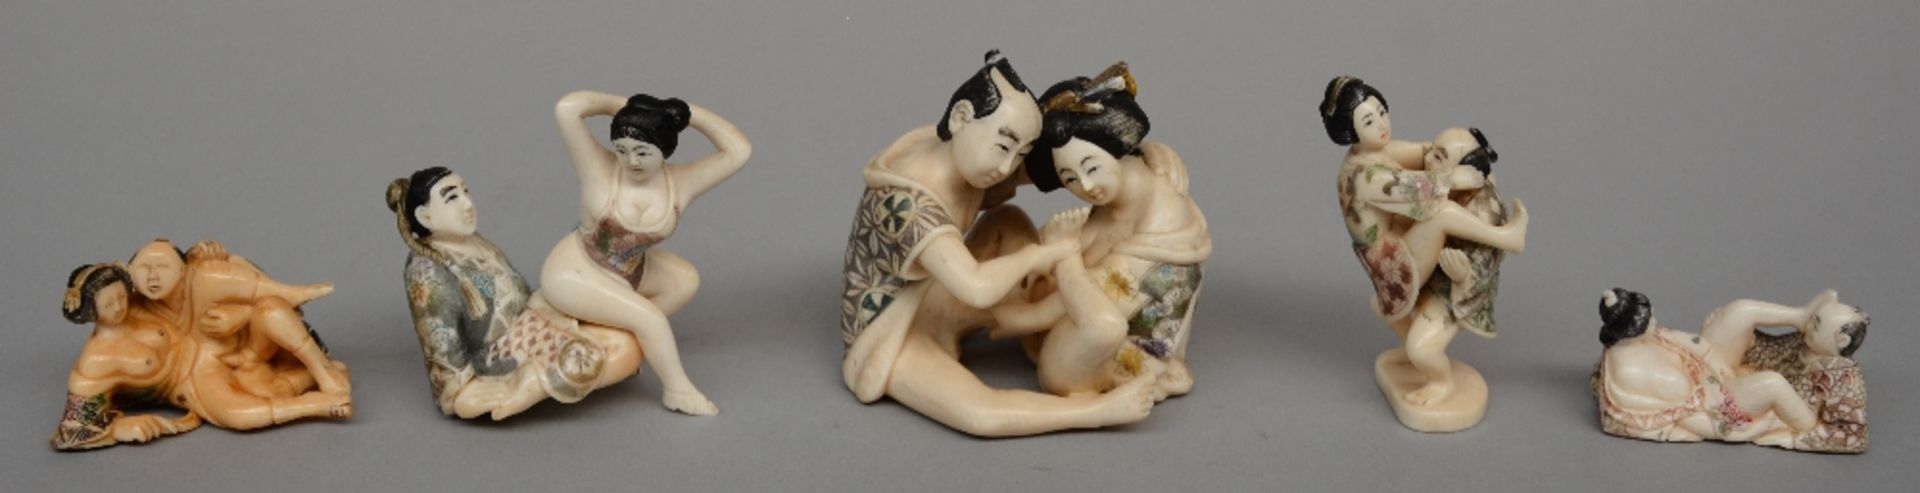 Five ivory erotic sculptures, Japanese style, scrimshaw decorated, first half of 20thC, H 3 - 7